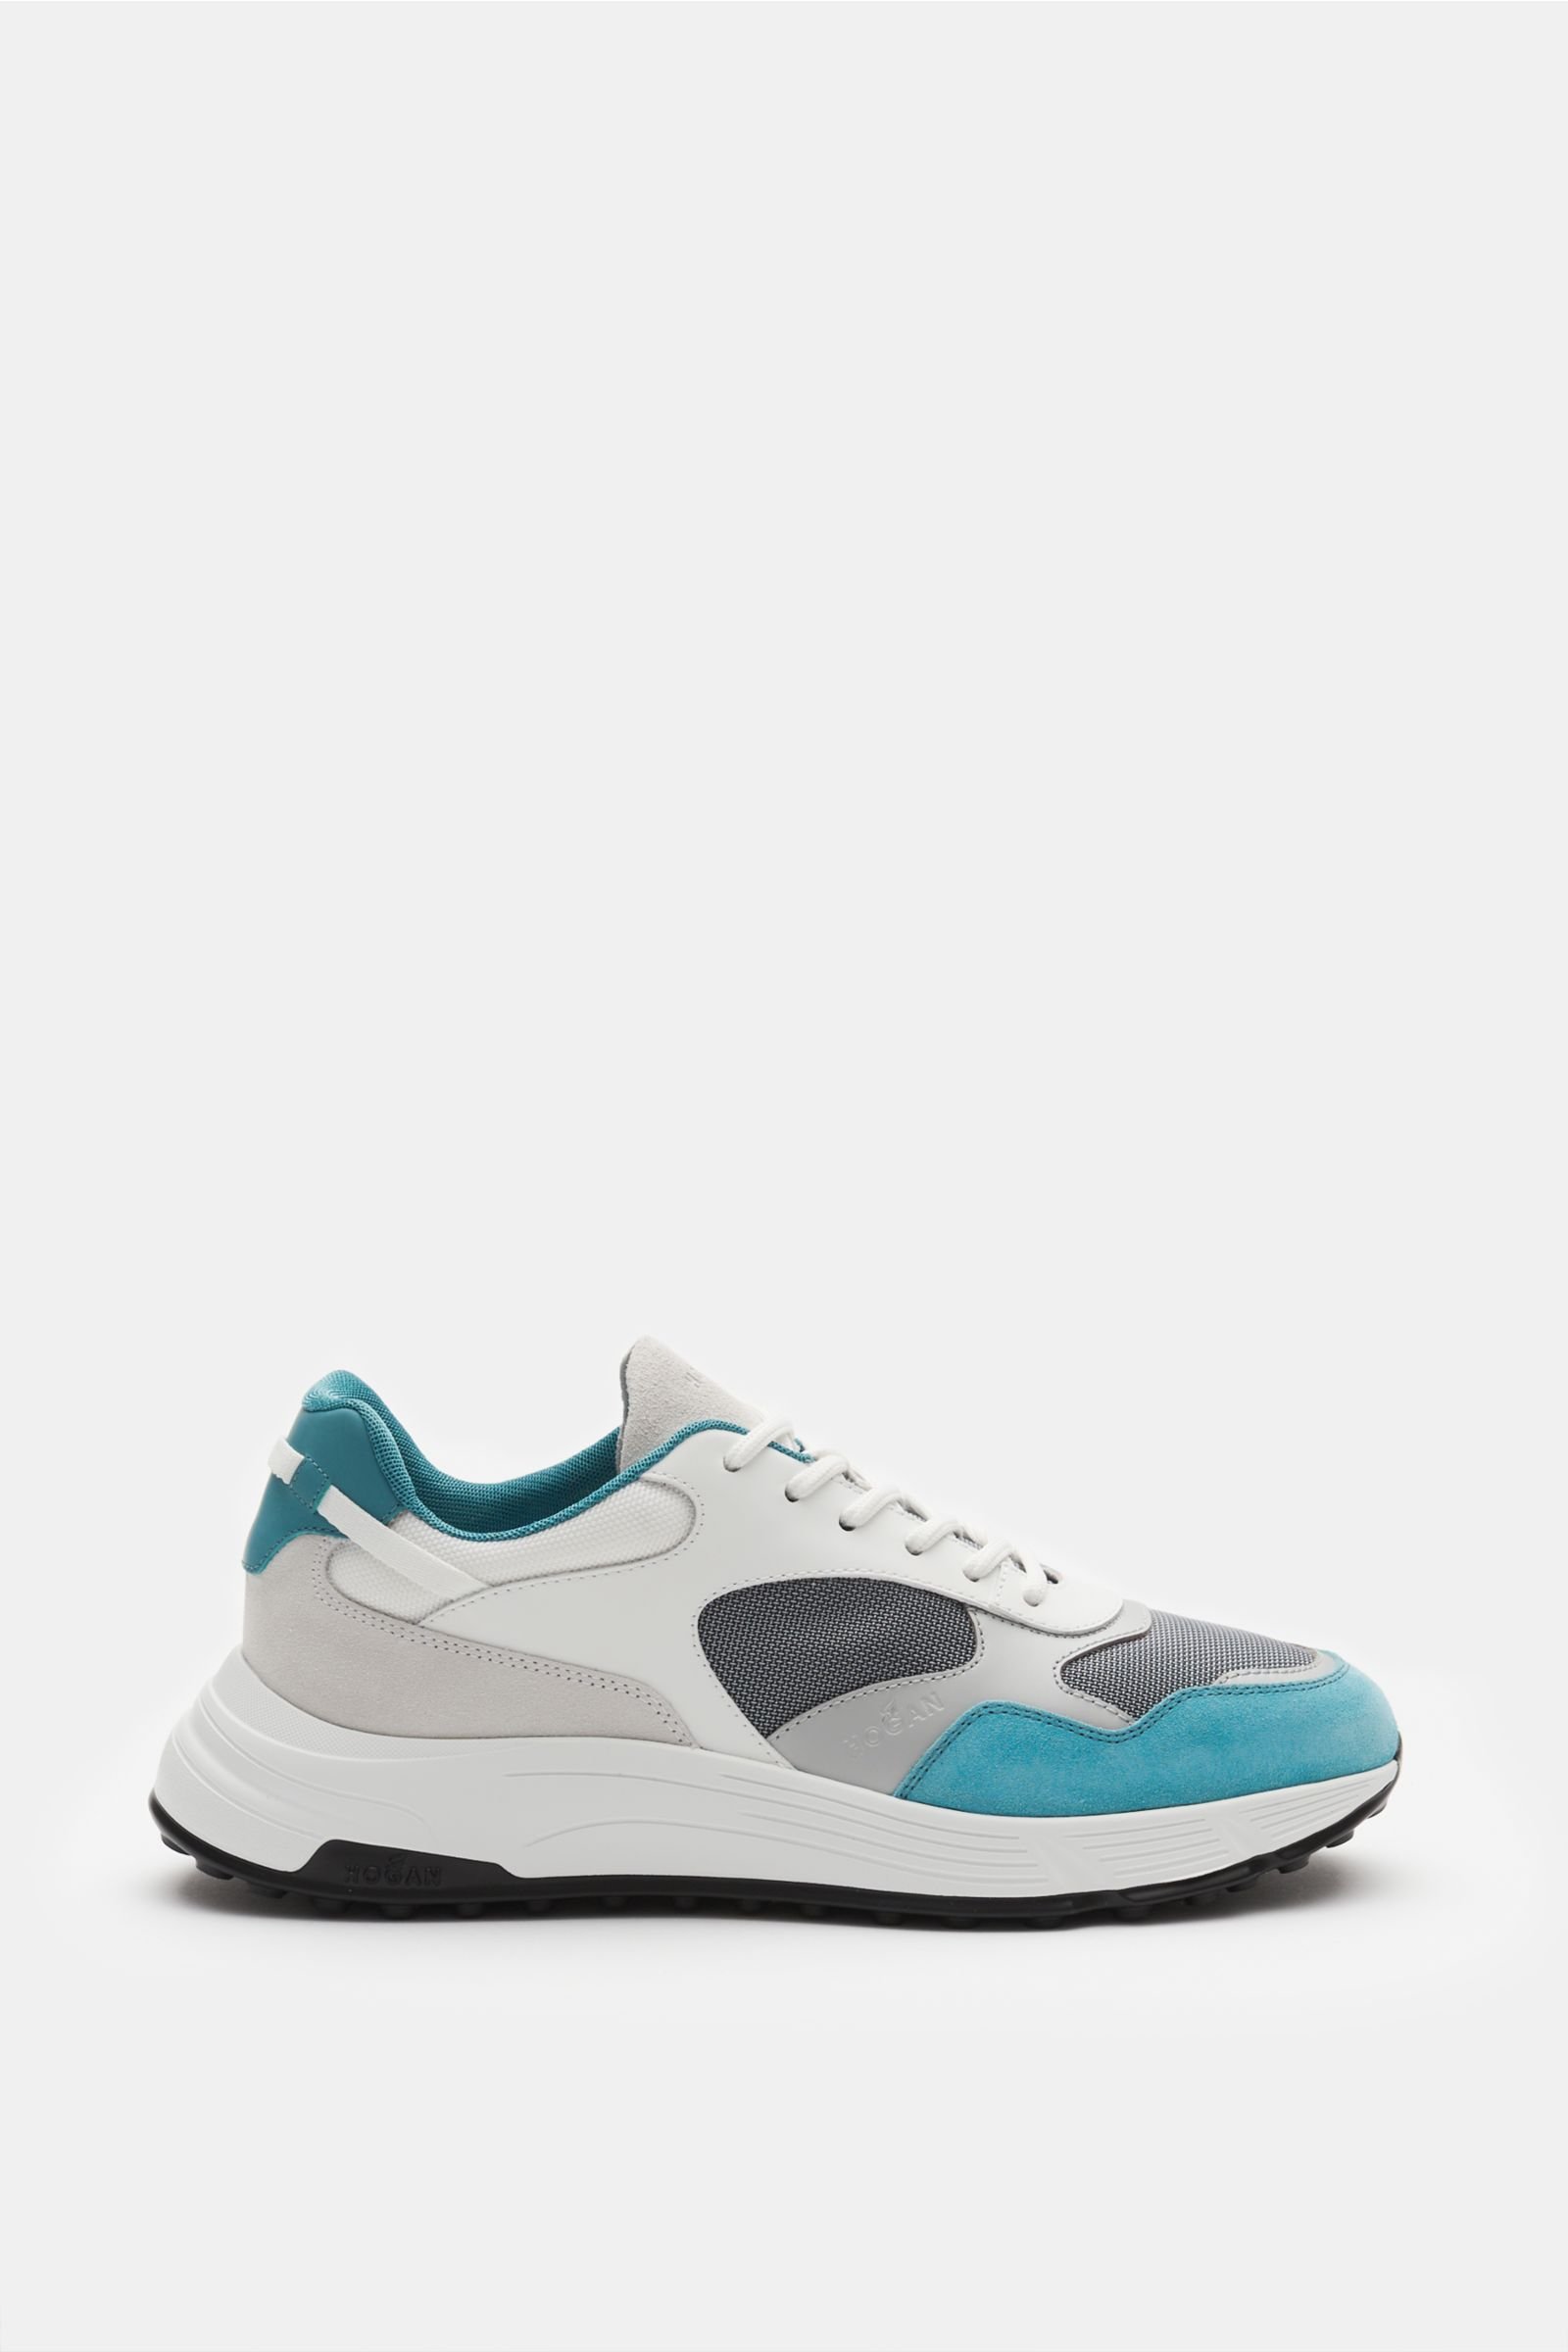 Sneakers 'Hyperlight' white/grey/turquoise